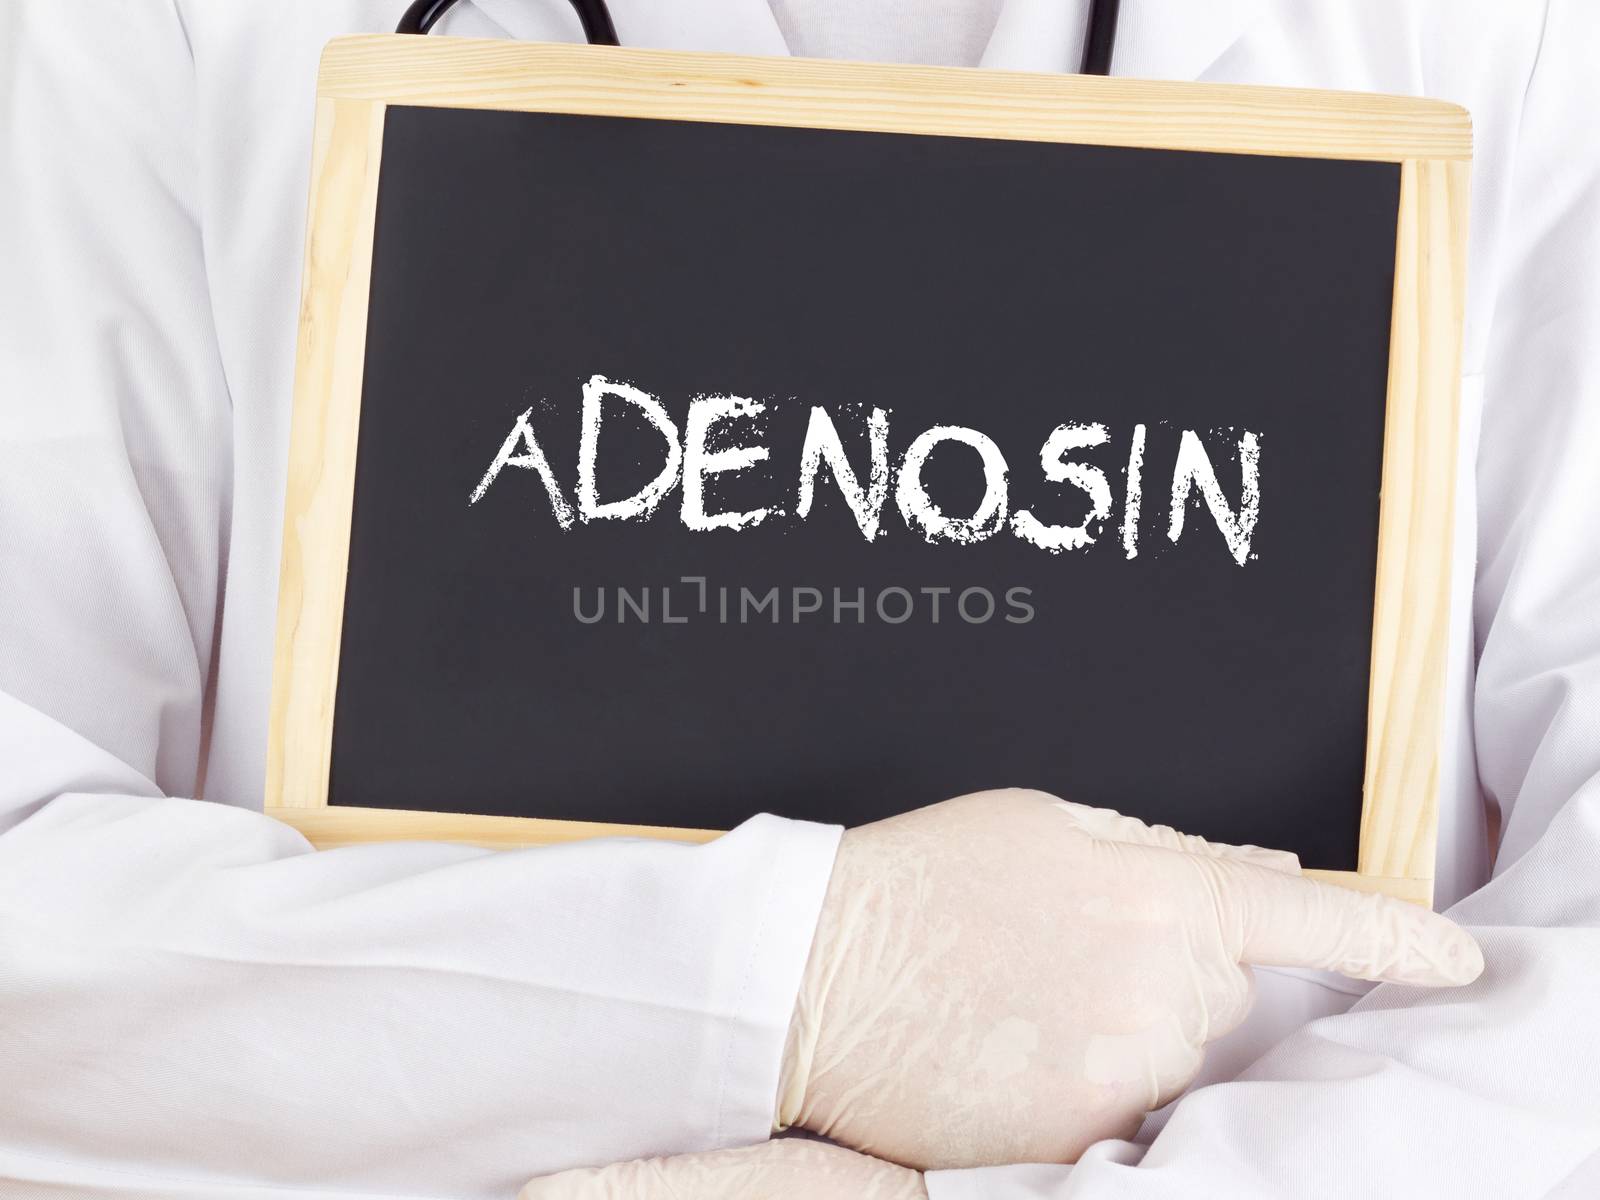 Doctor shows information: adenine riboside in german by gwolters